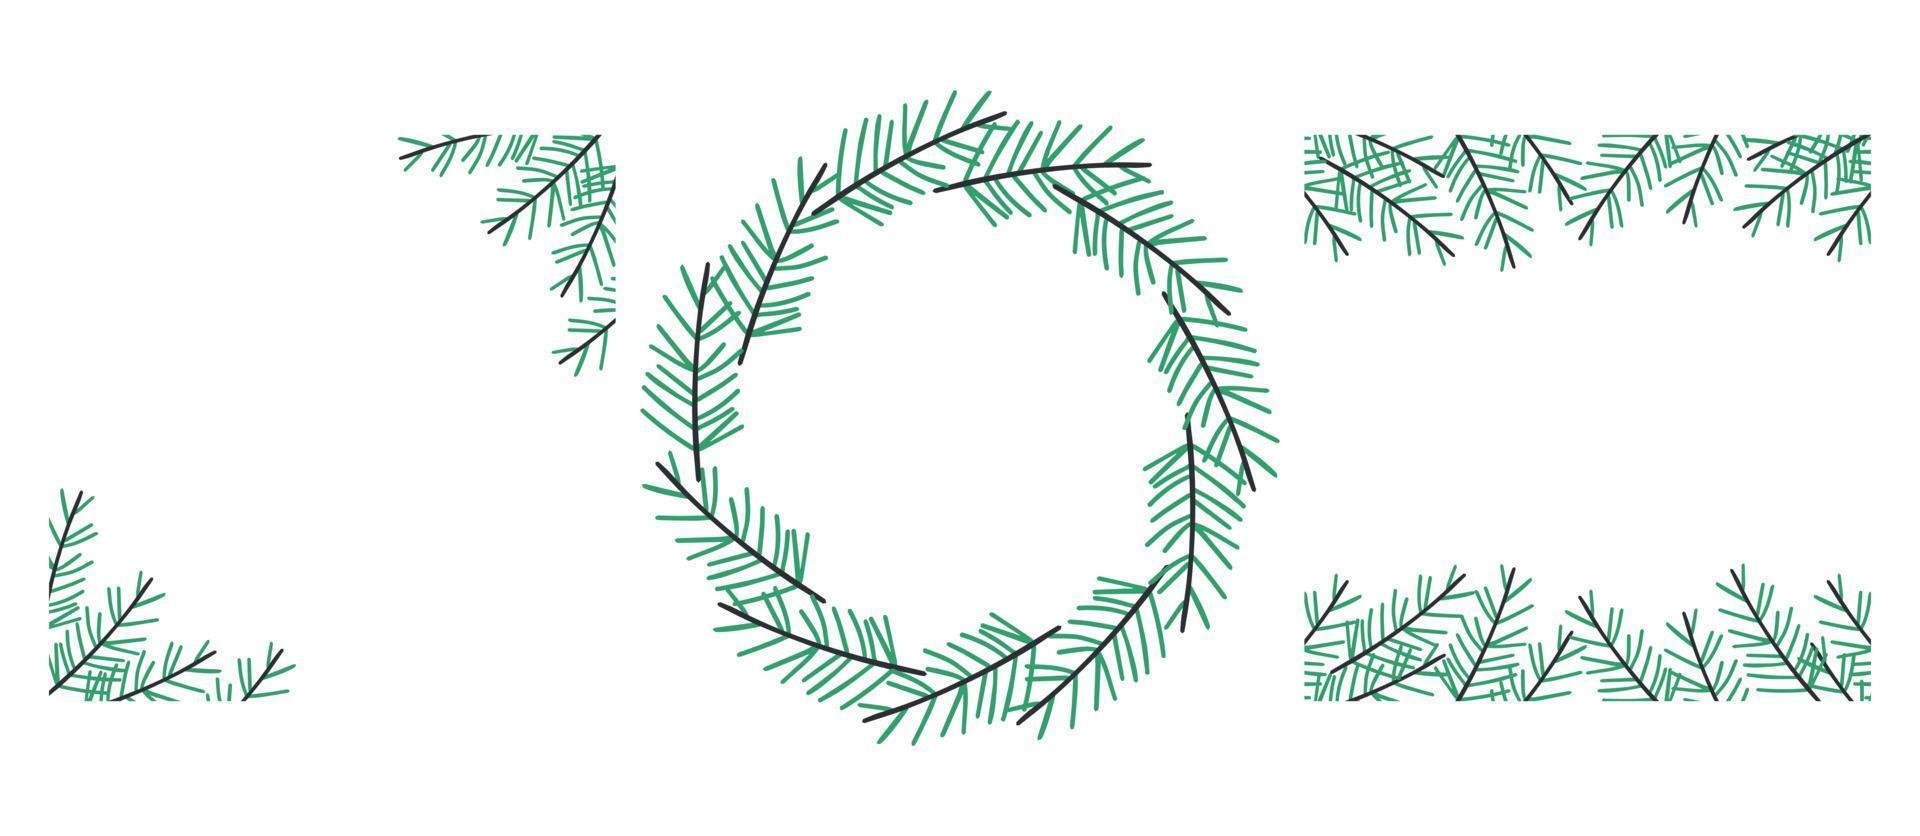 Winter fir branches frames collection. Winter wreath illustration with green fir branches on white background. vector